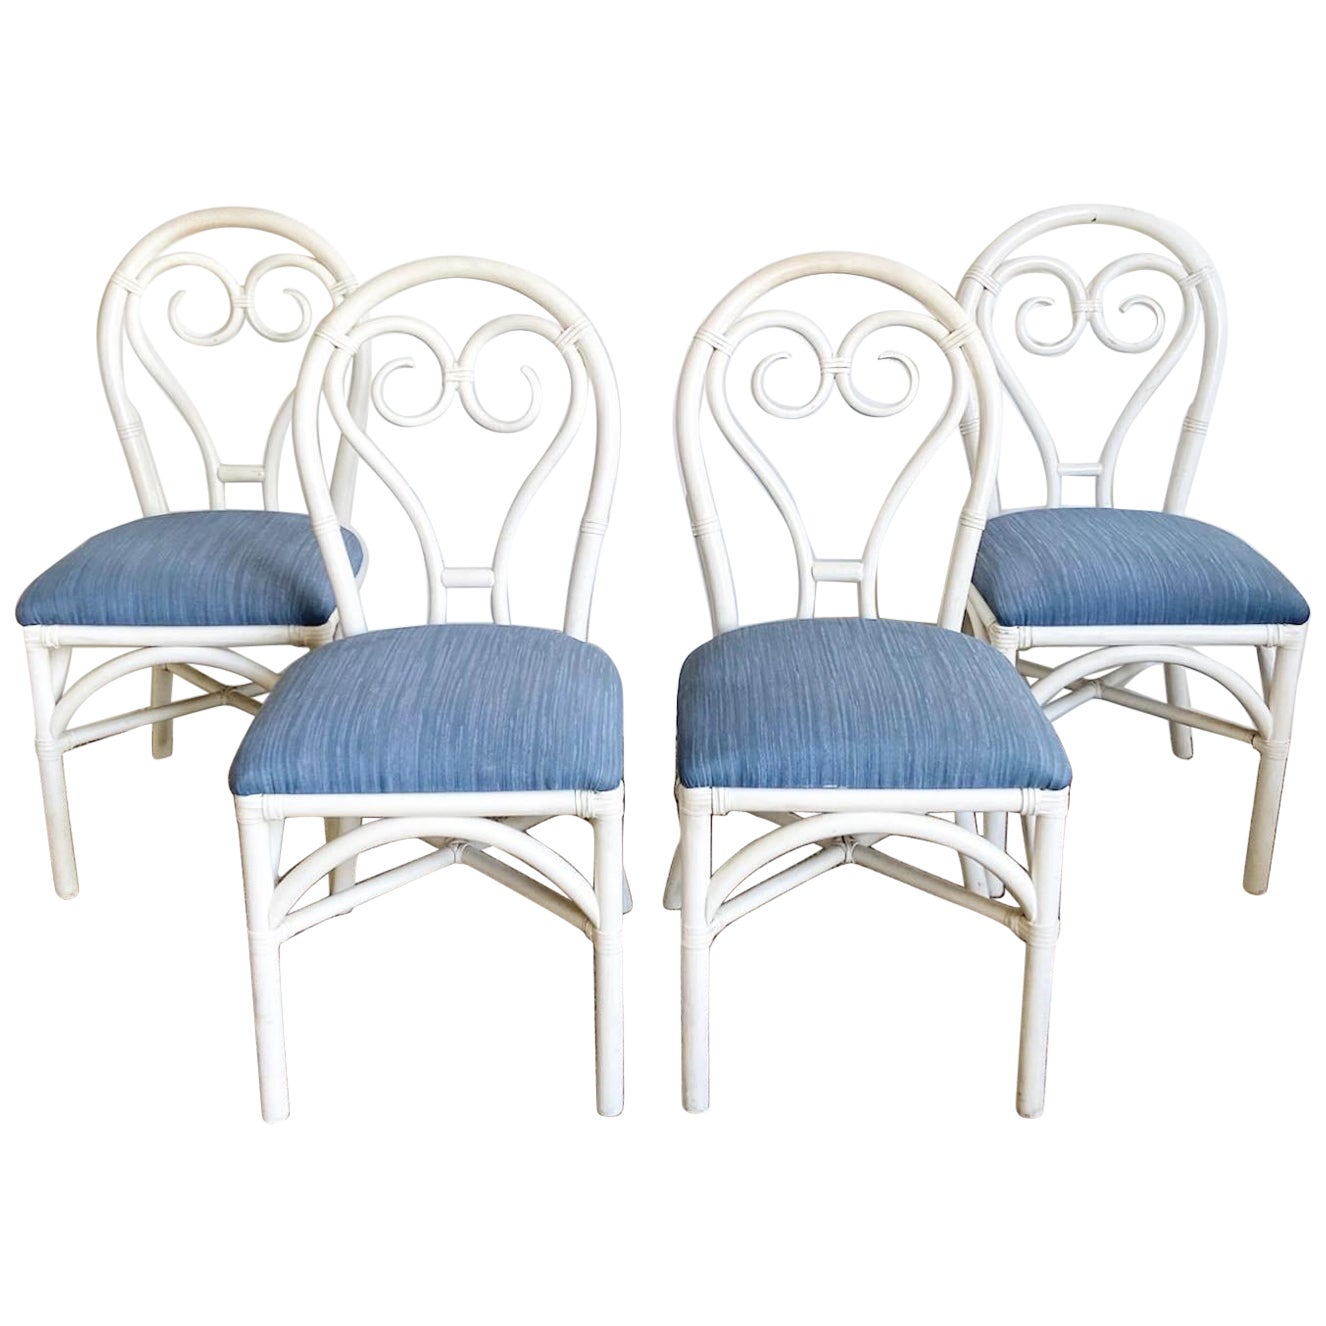 Boho Chic White Sculpted Bamboo Rattan Dining Chairs - Set of 4 For Sale